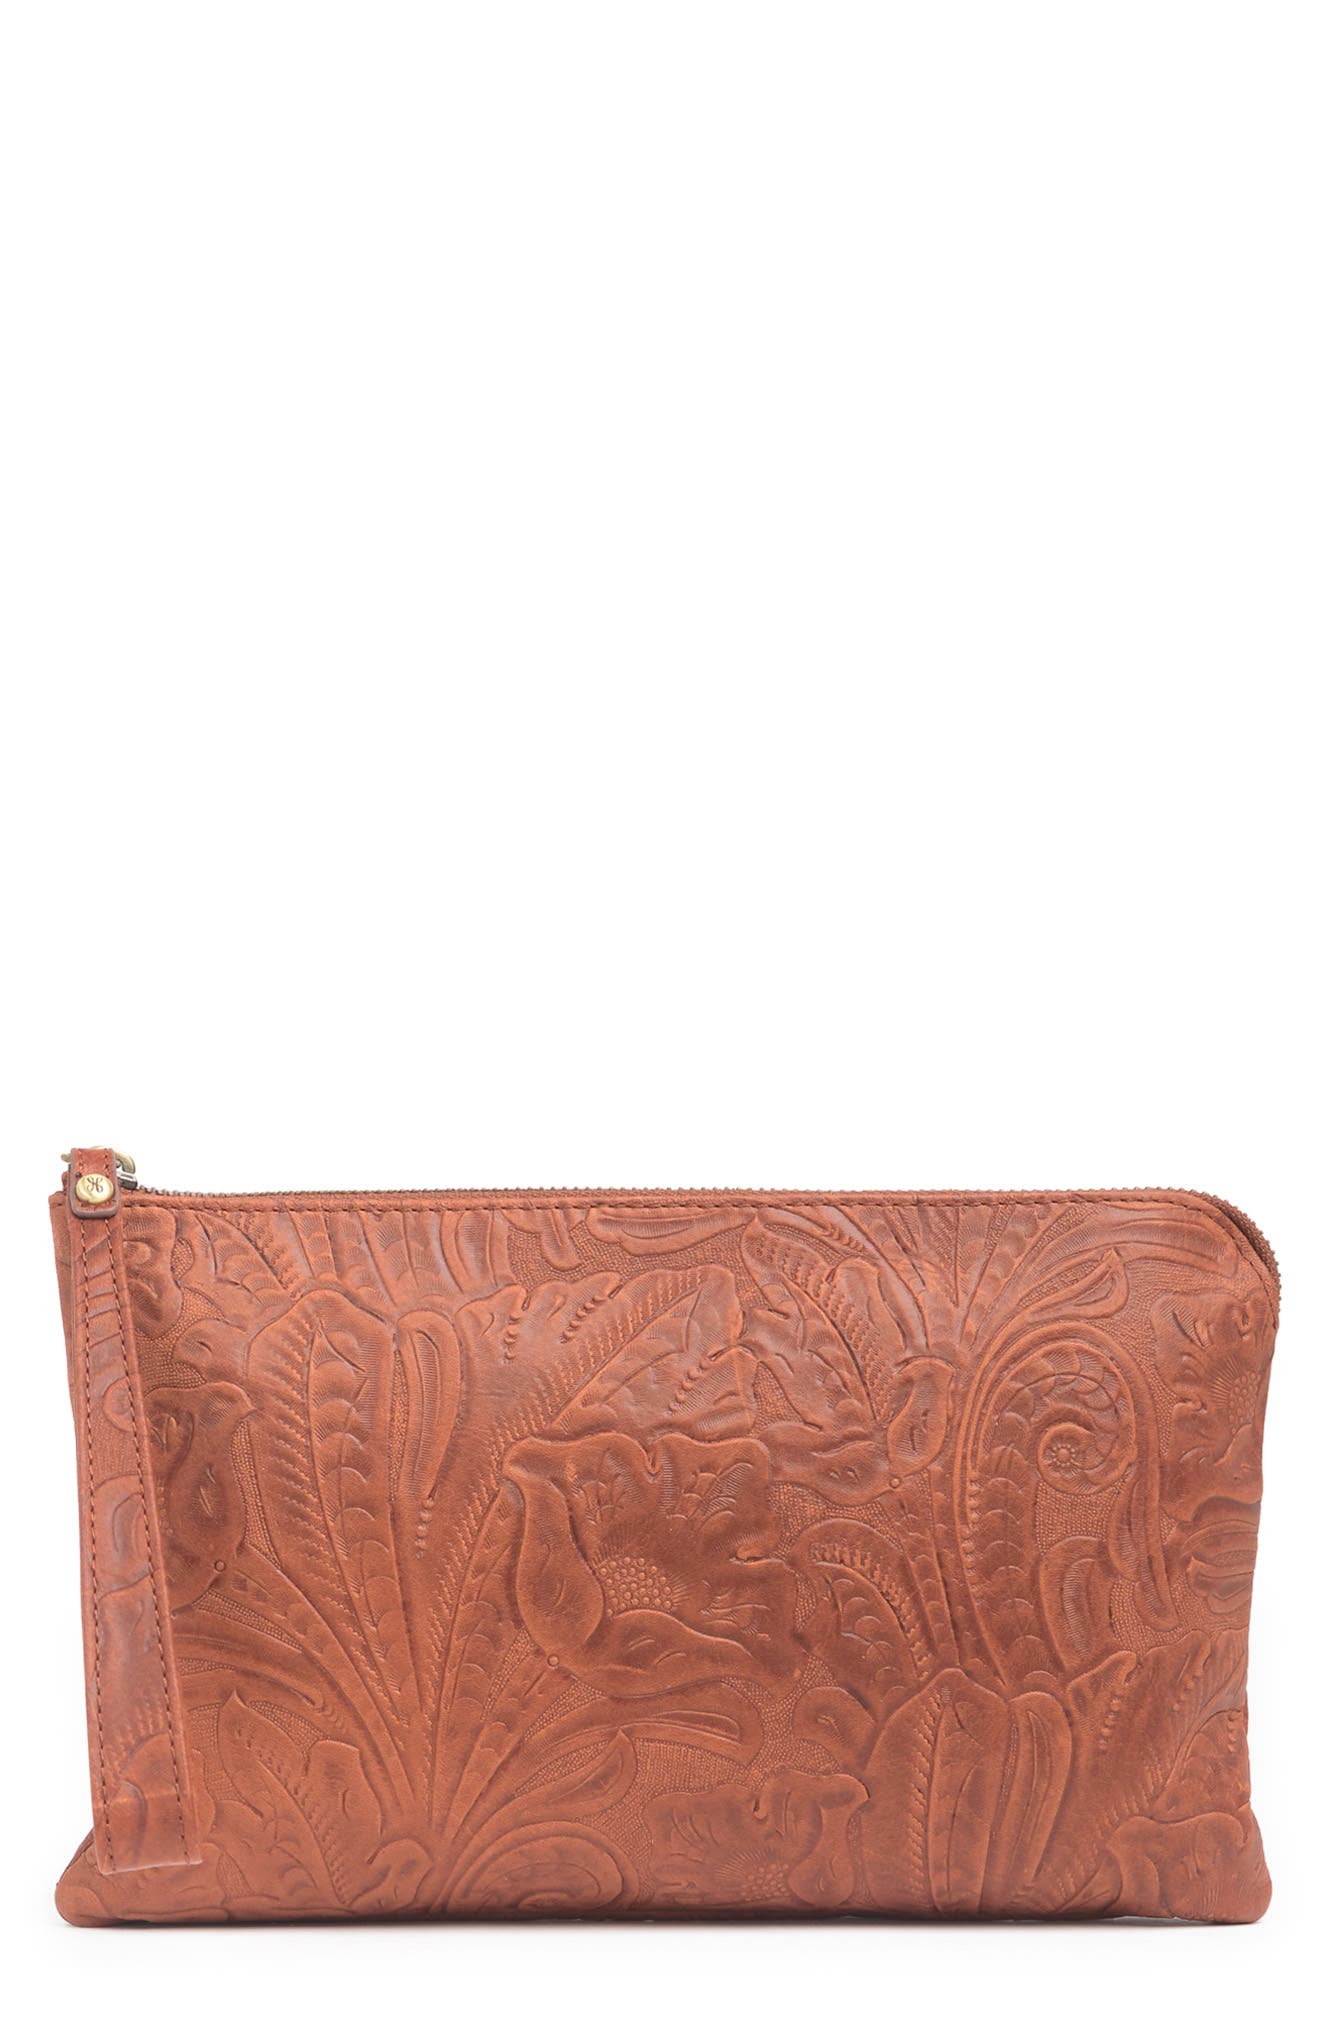 Hobo Wayfare Leather Clutch In Embossed Floral